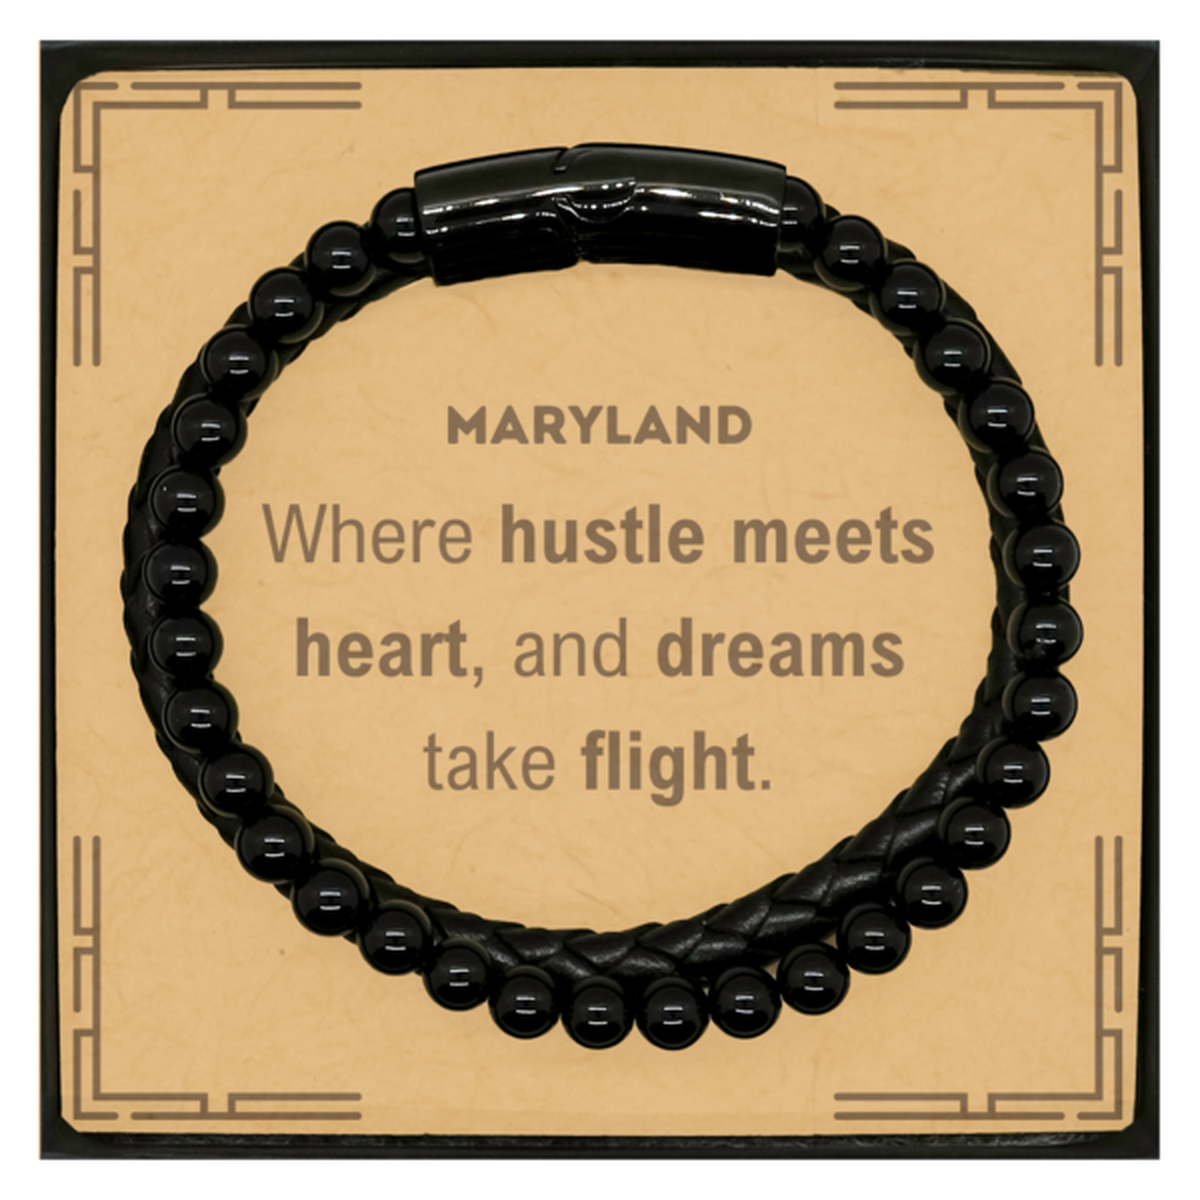 Maryland: Where hustle meets heart, and dreams take flight, Maryland Card Gifts, Proud Maryland Christmas Birthday Maryland Stone Leather Bracelets, Maryland State People, Men, Women, Friends